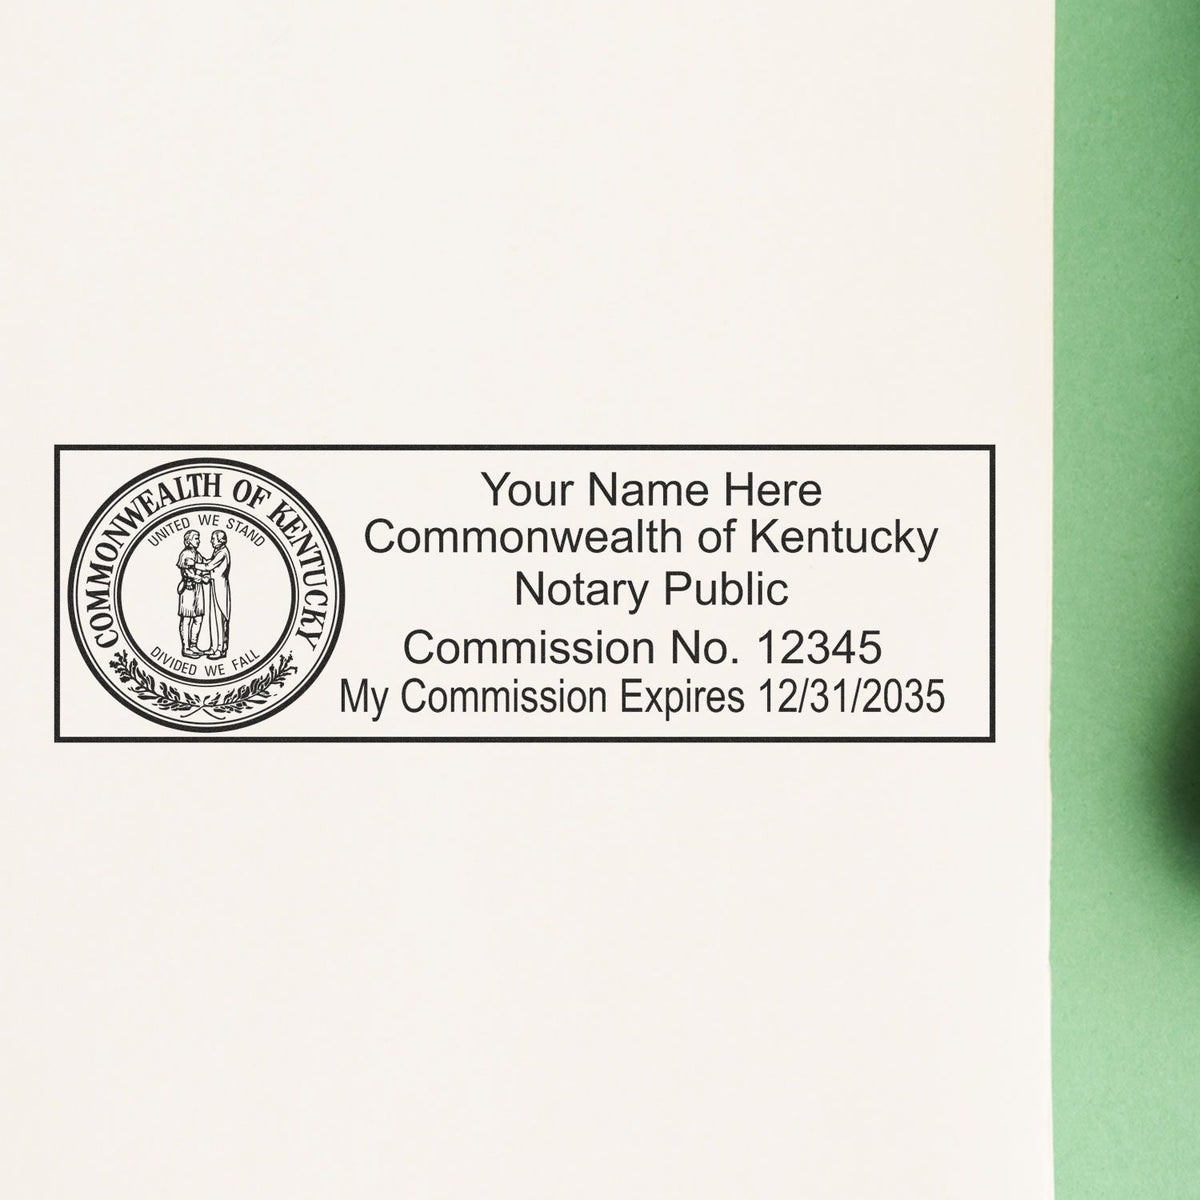 The Slim Pre-Inked State Seal Notary Stamp for Kentucky stamp impression comes to life with a crisp, detailed photo on paper - showcasing true professional quality.